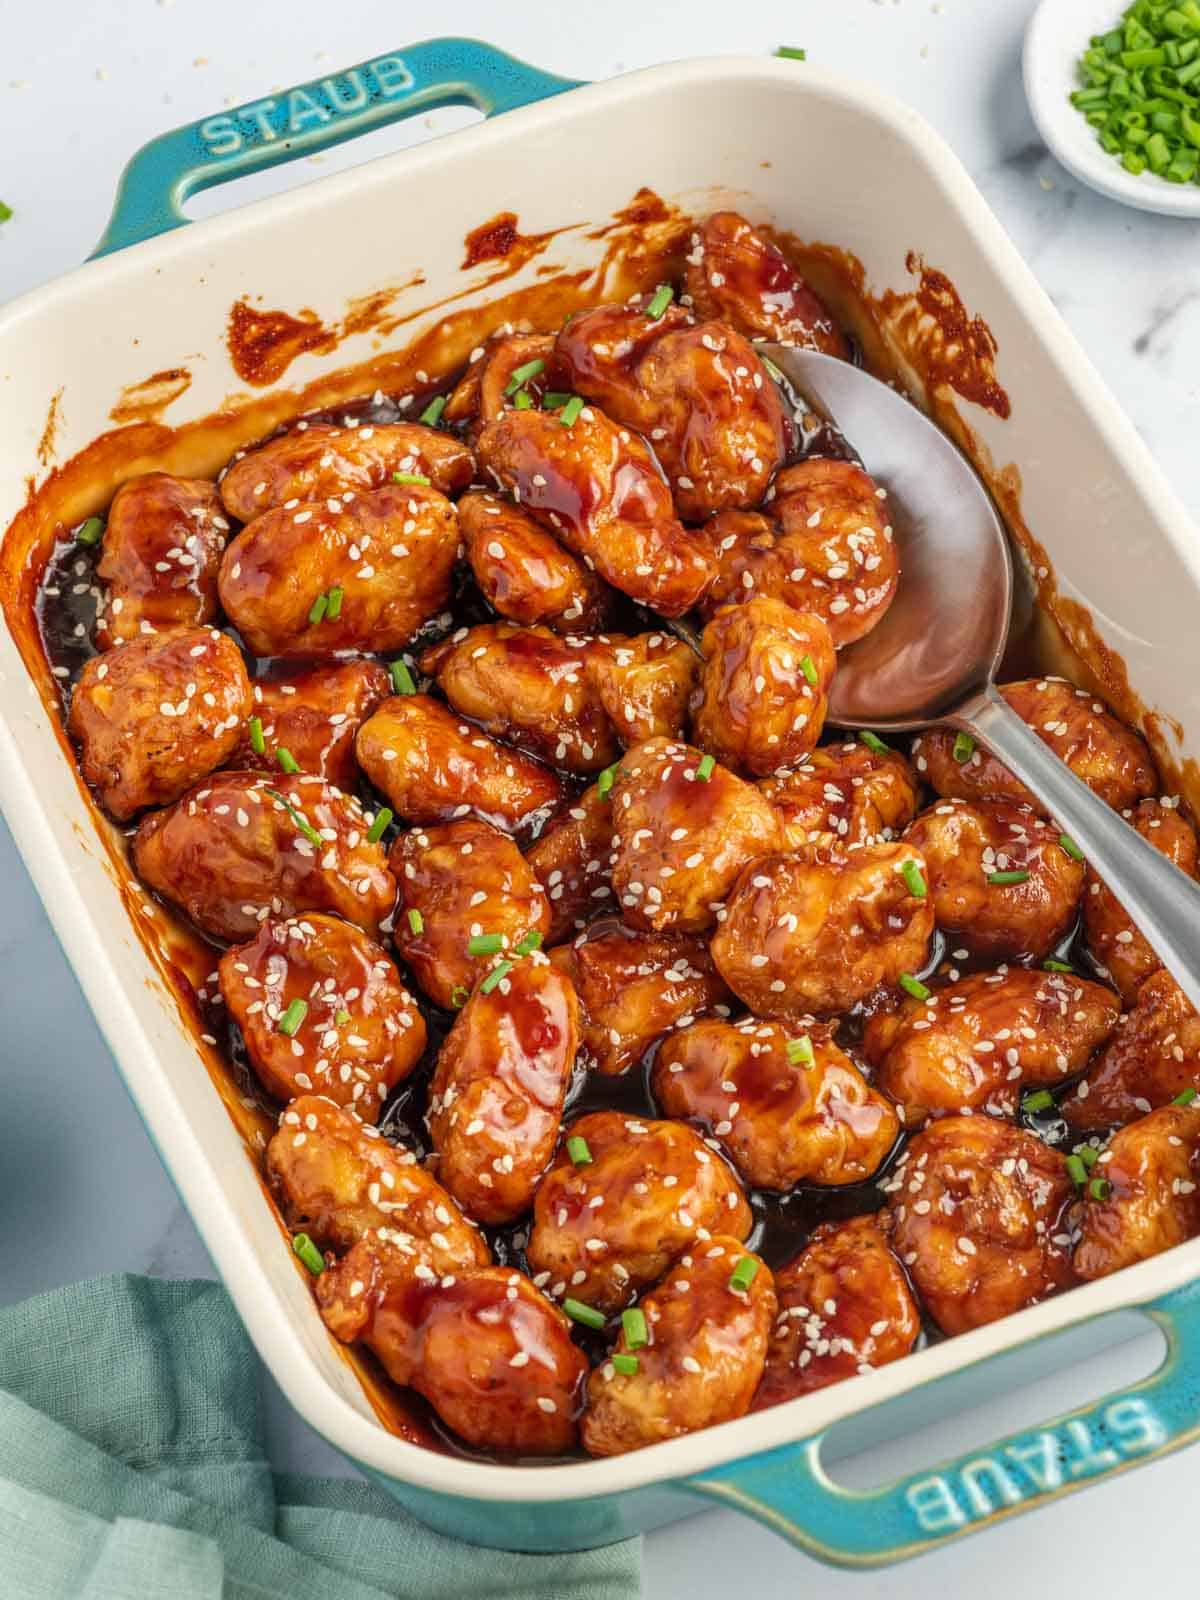 A spoon scoops baked honey sesame chicken breast from a casserole dish.